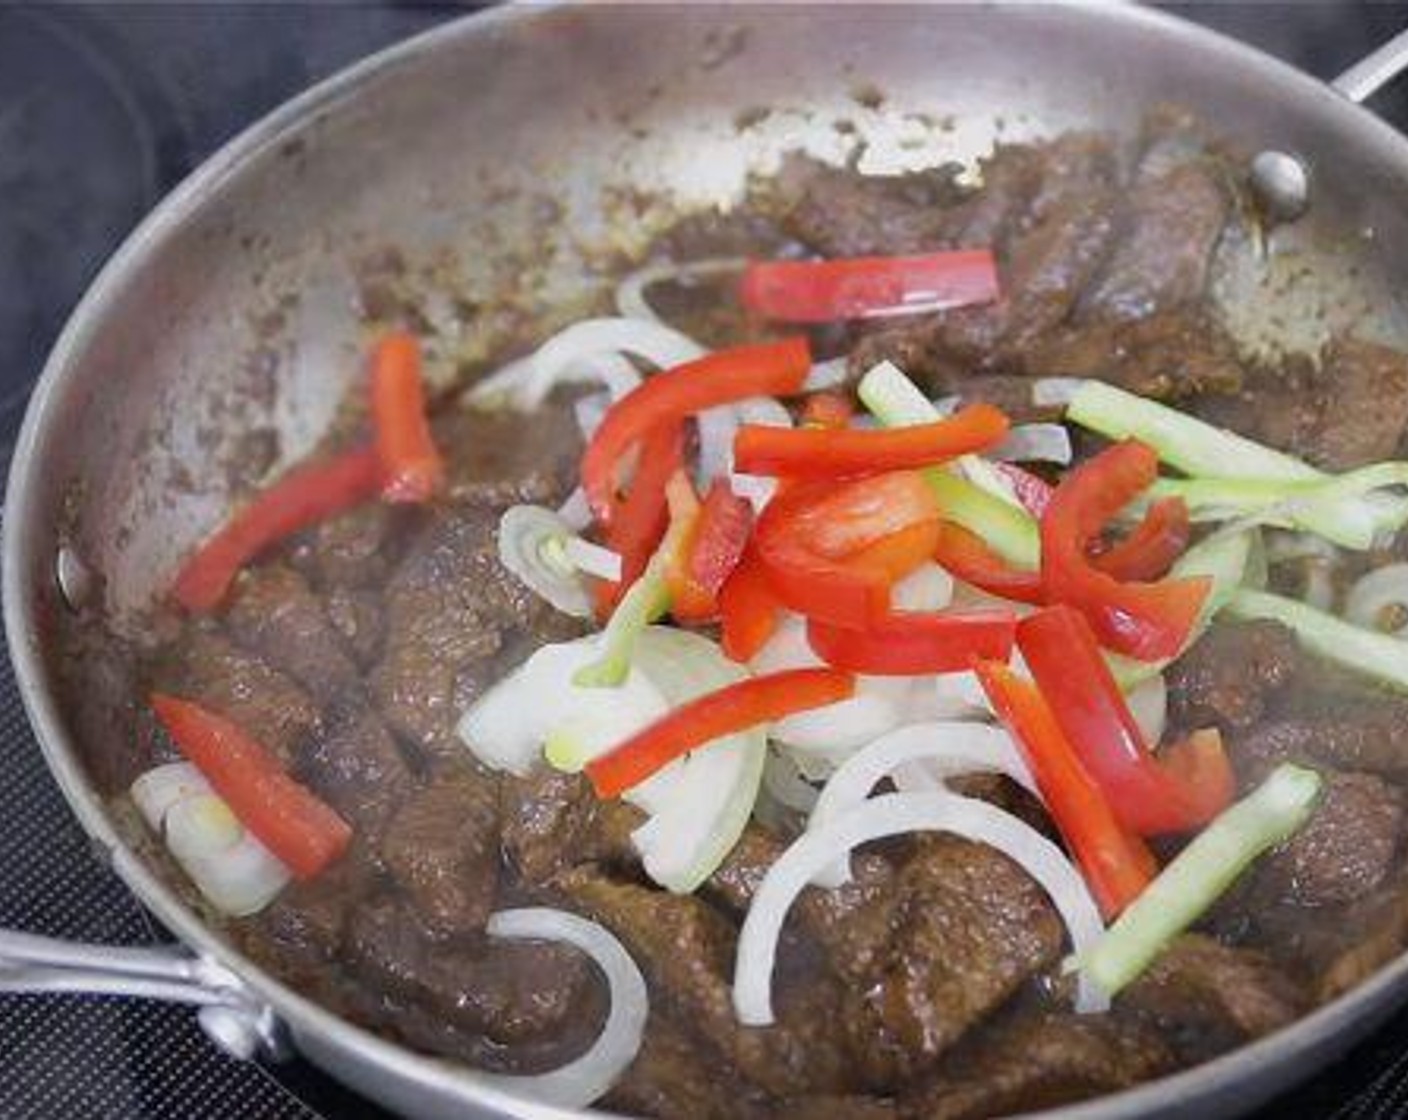 step 11 Once the beef is tender, add onion, cubanelle pepper and red bell pepper and stir to combine. Add Tomato Paste (1/4 cup) and enough water to make a stew-like gravy consistency, then stir to blend everything well. Cover and cook for 3-5 minutes.